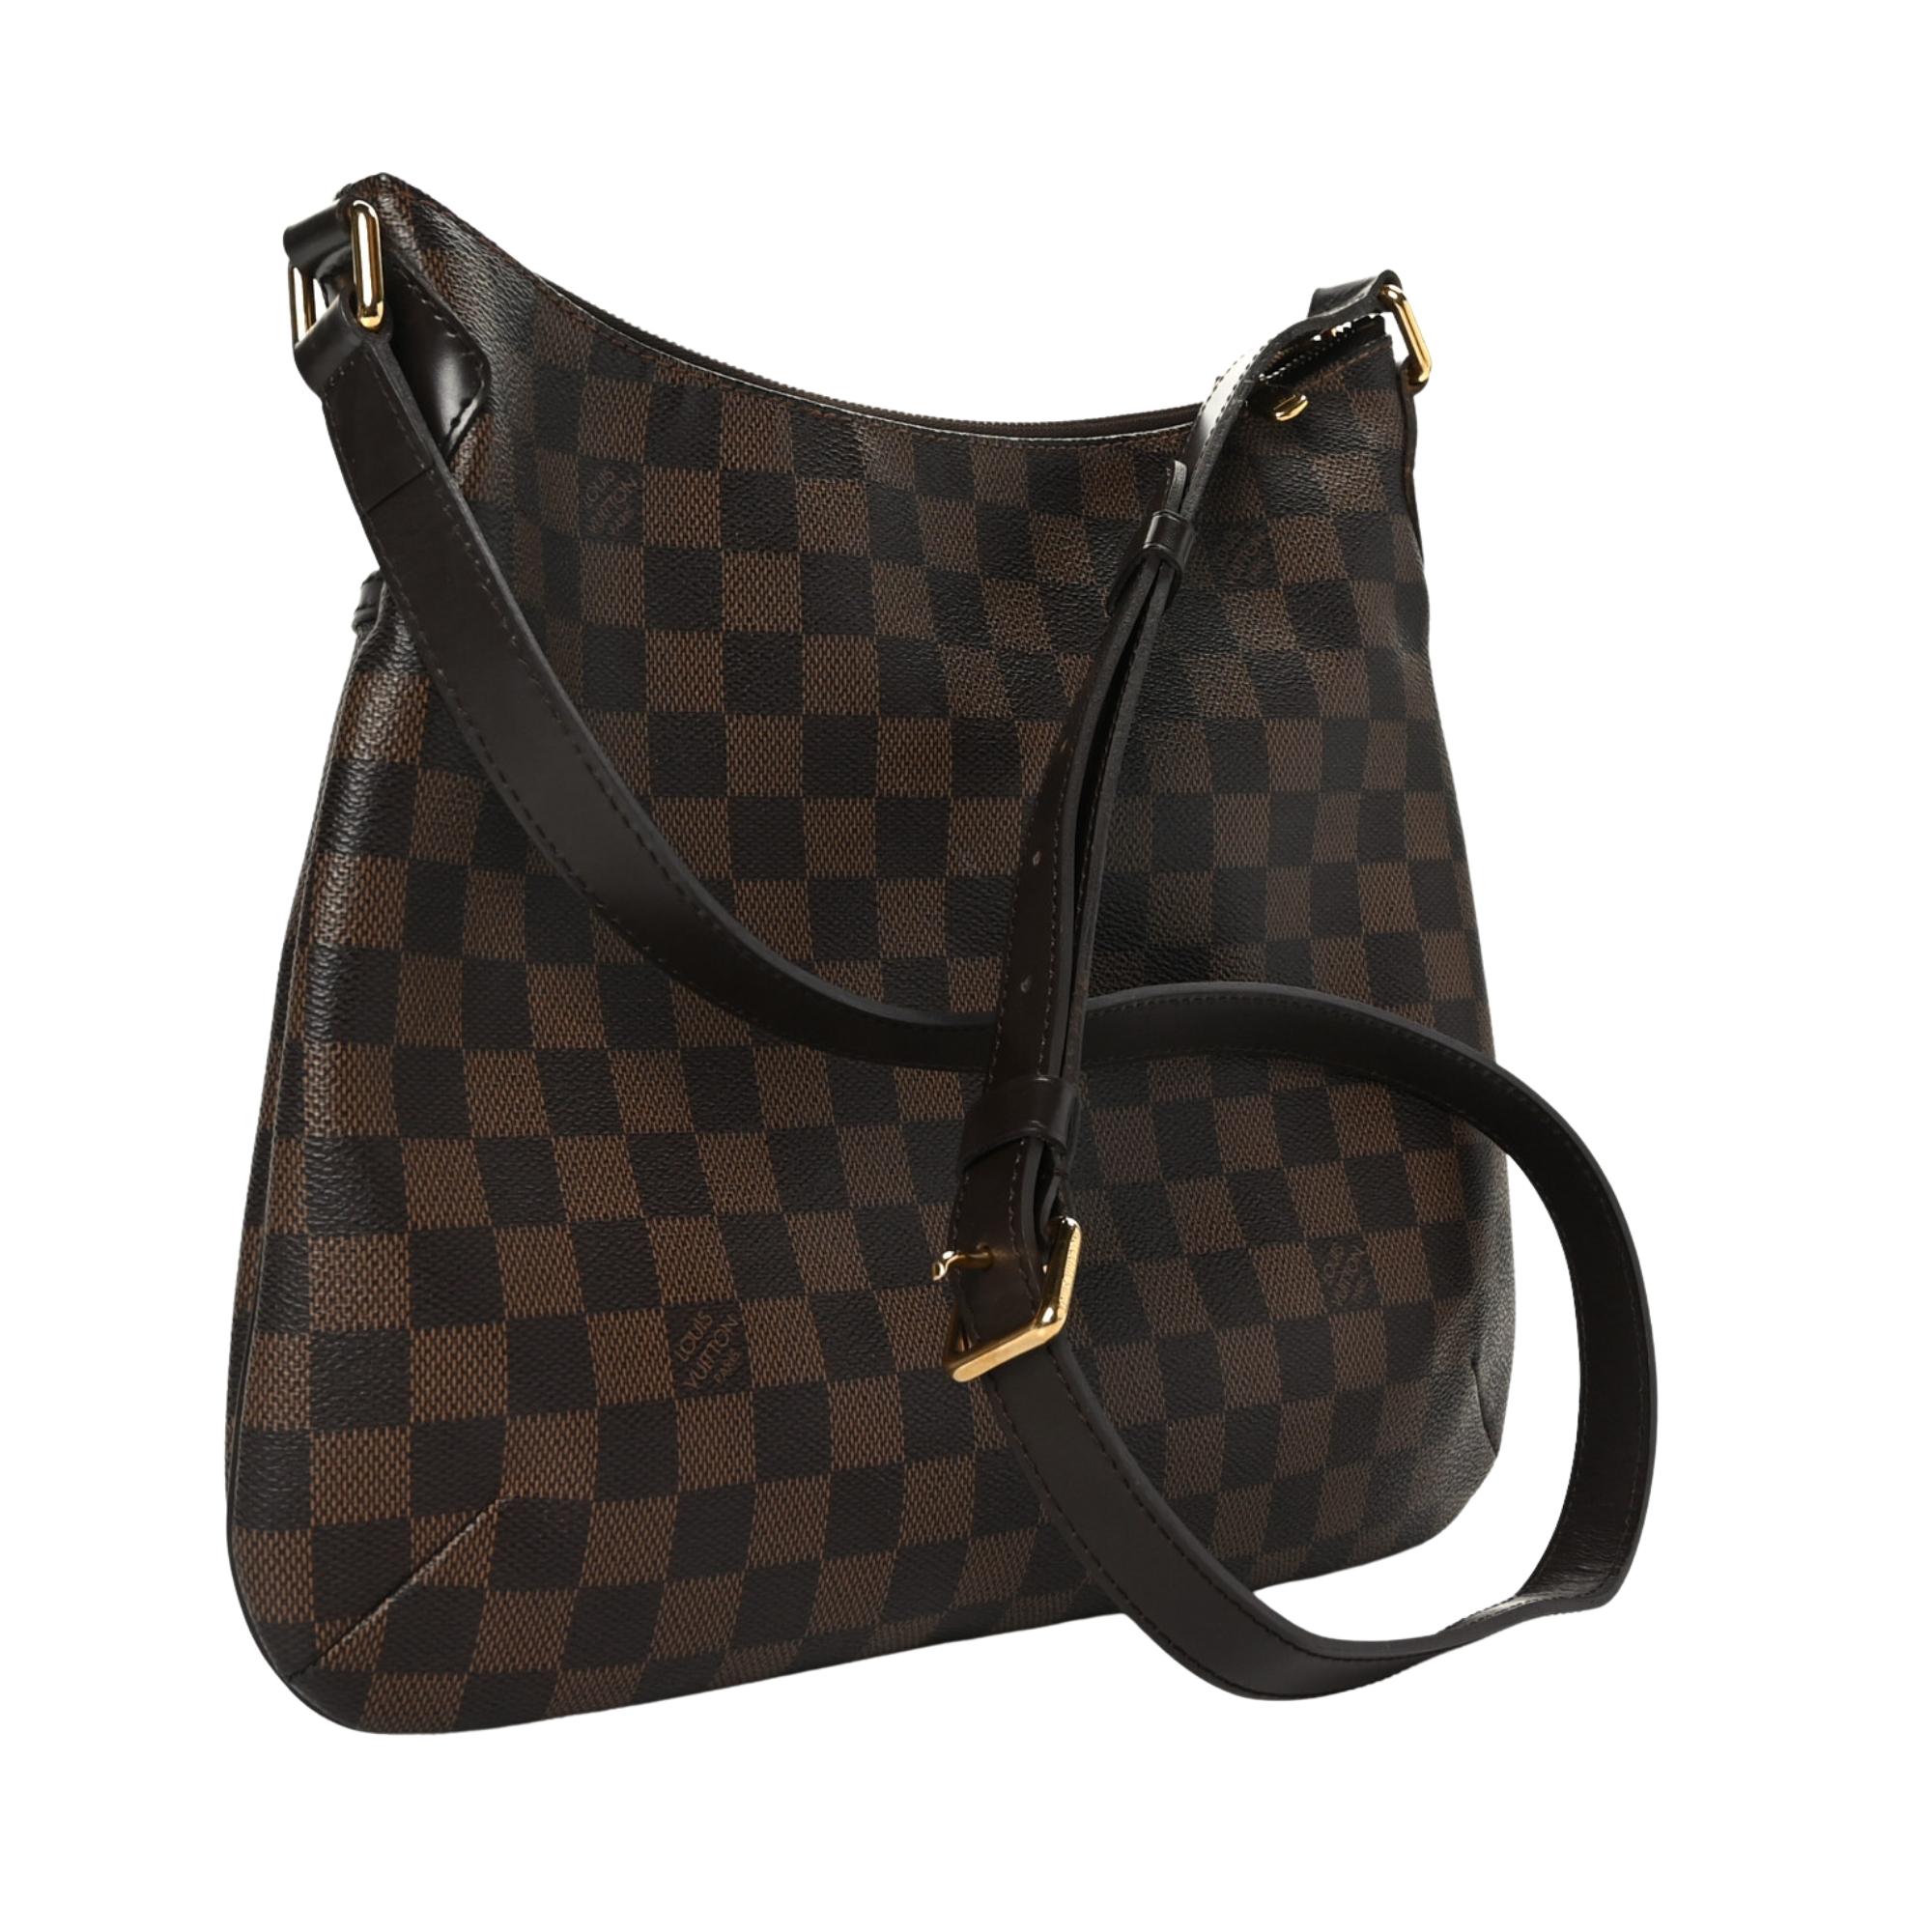 LOUIS VUITTON DAMIER EBENE BLOOMSBURY PM SHOULDER BAG (2015)

This shoulder bag is made of Louis Vuitton damier pleated coated canvas with a full facing patch pocket. The bag features a complimentary dark chocolate leather adjustable shoulder strap